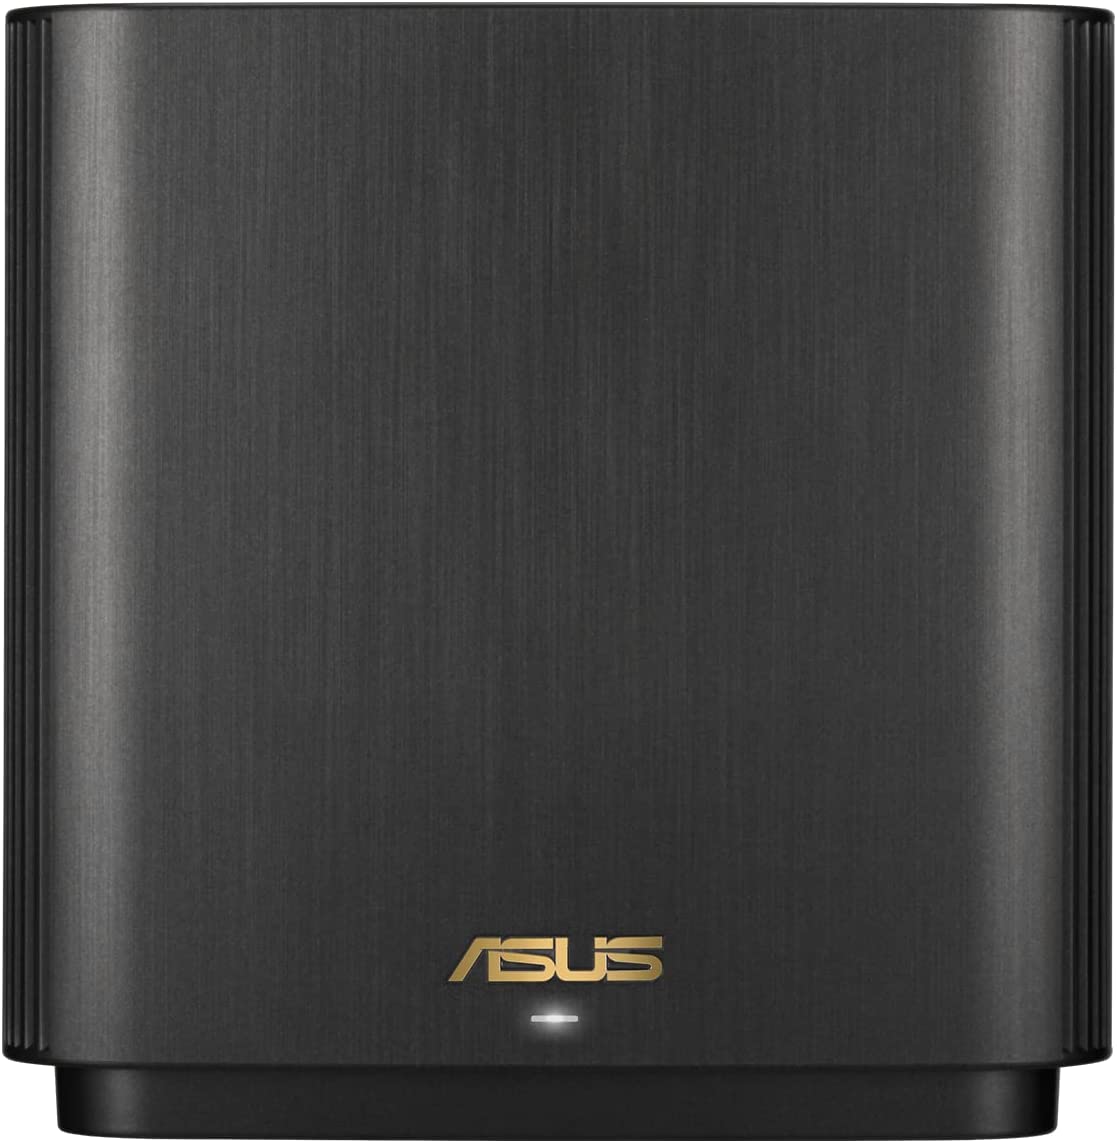 ASUS ZenWiFi XT9 AX7800 Tri-Band WiFi6 Mesh WiFiSystem (1Pack), 802.11ax, up to 2850 sq ft &amp; 4+ Rooms, AiMesh, Lifetime Free Internet Security, Parental Controls, 2.5G WAN Port, UNII 4, Charcoal